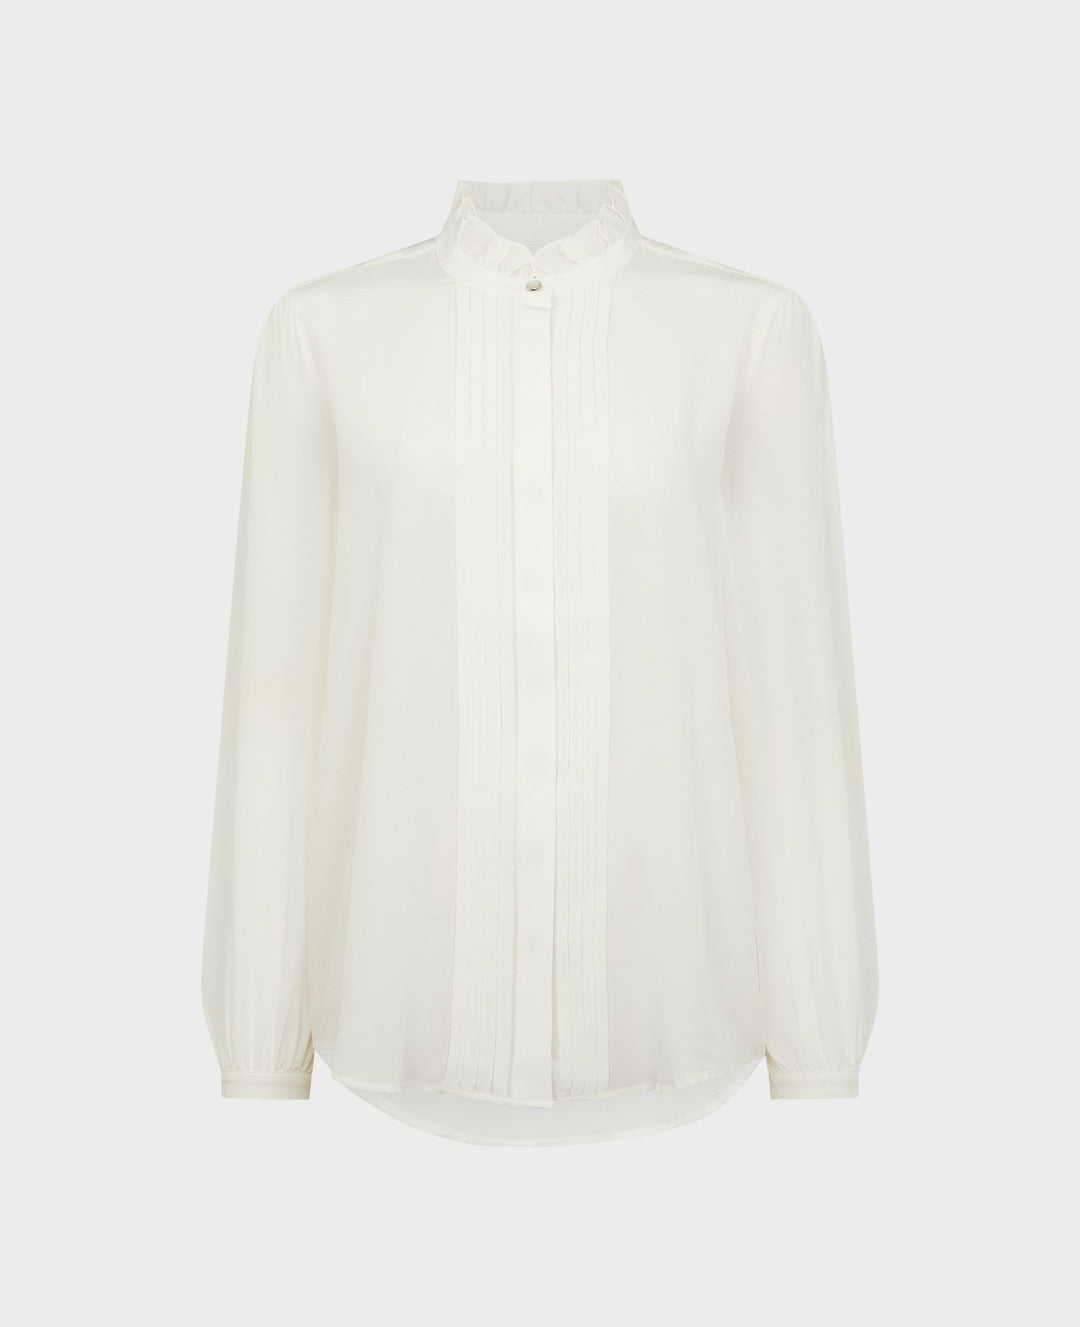 The dainty details of this pretty shirt set it apart from the rest. From the pintuck front detailing and decorative top buttons to the frill collar, this silk shirt goes from season to season with grace. 